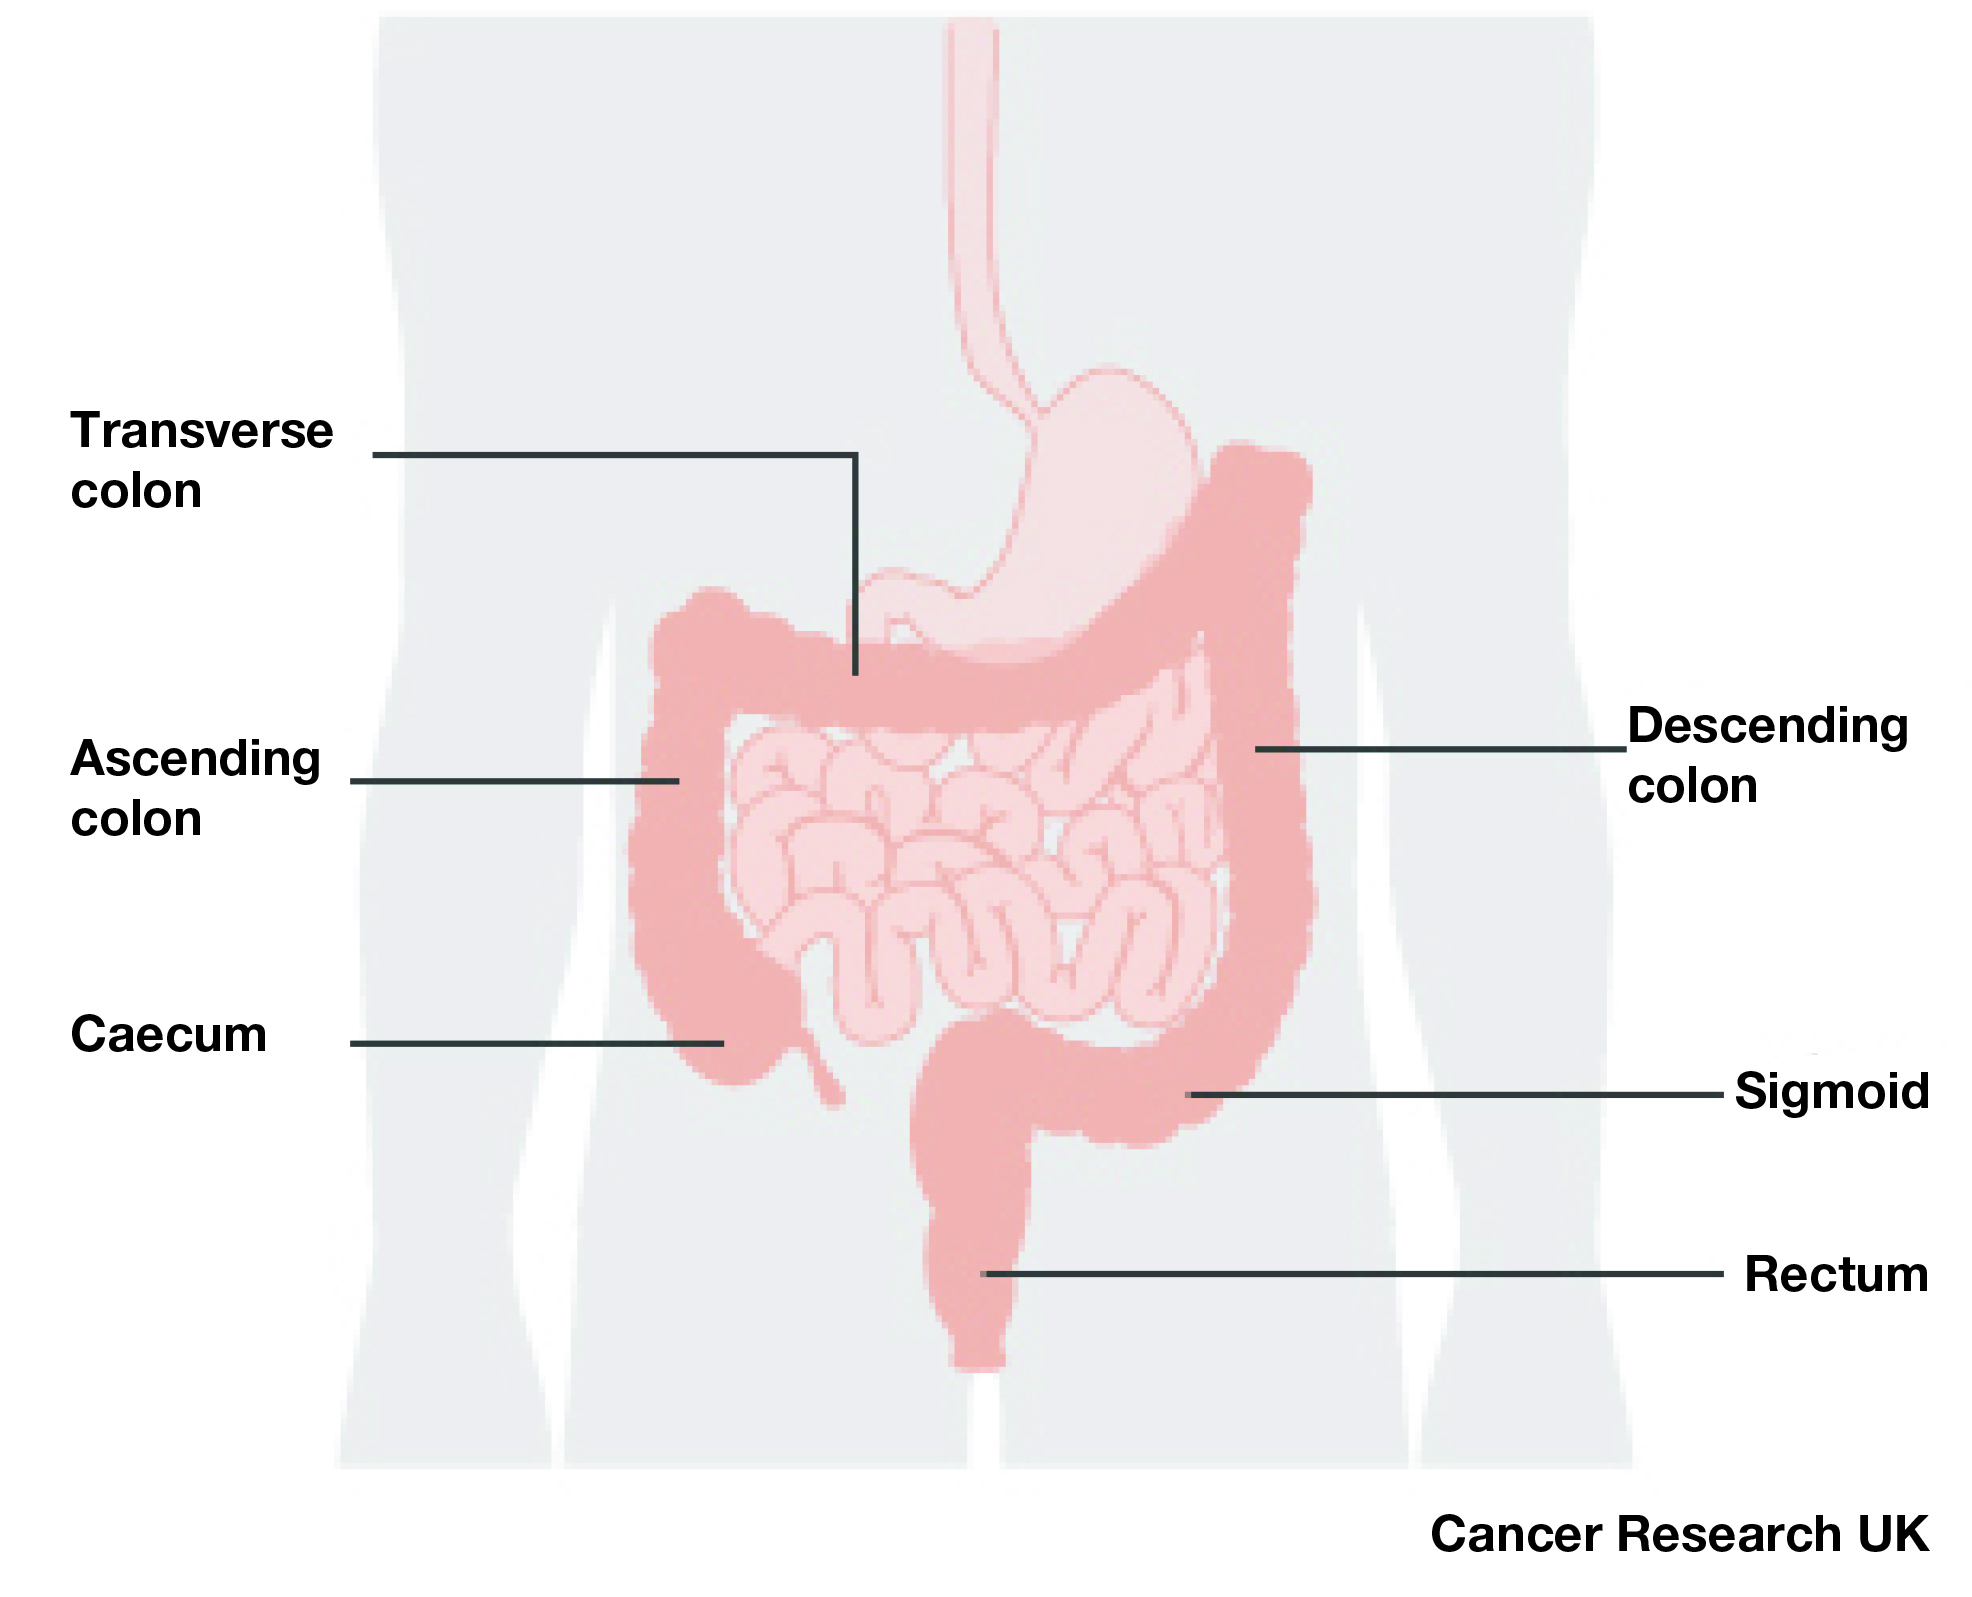 The bowel- also known as the colon